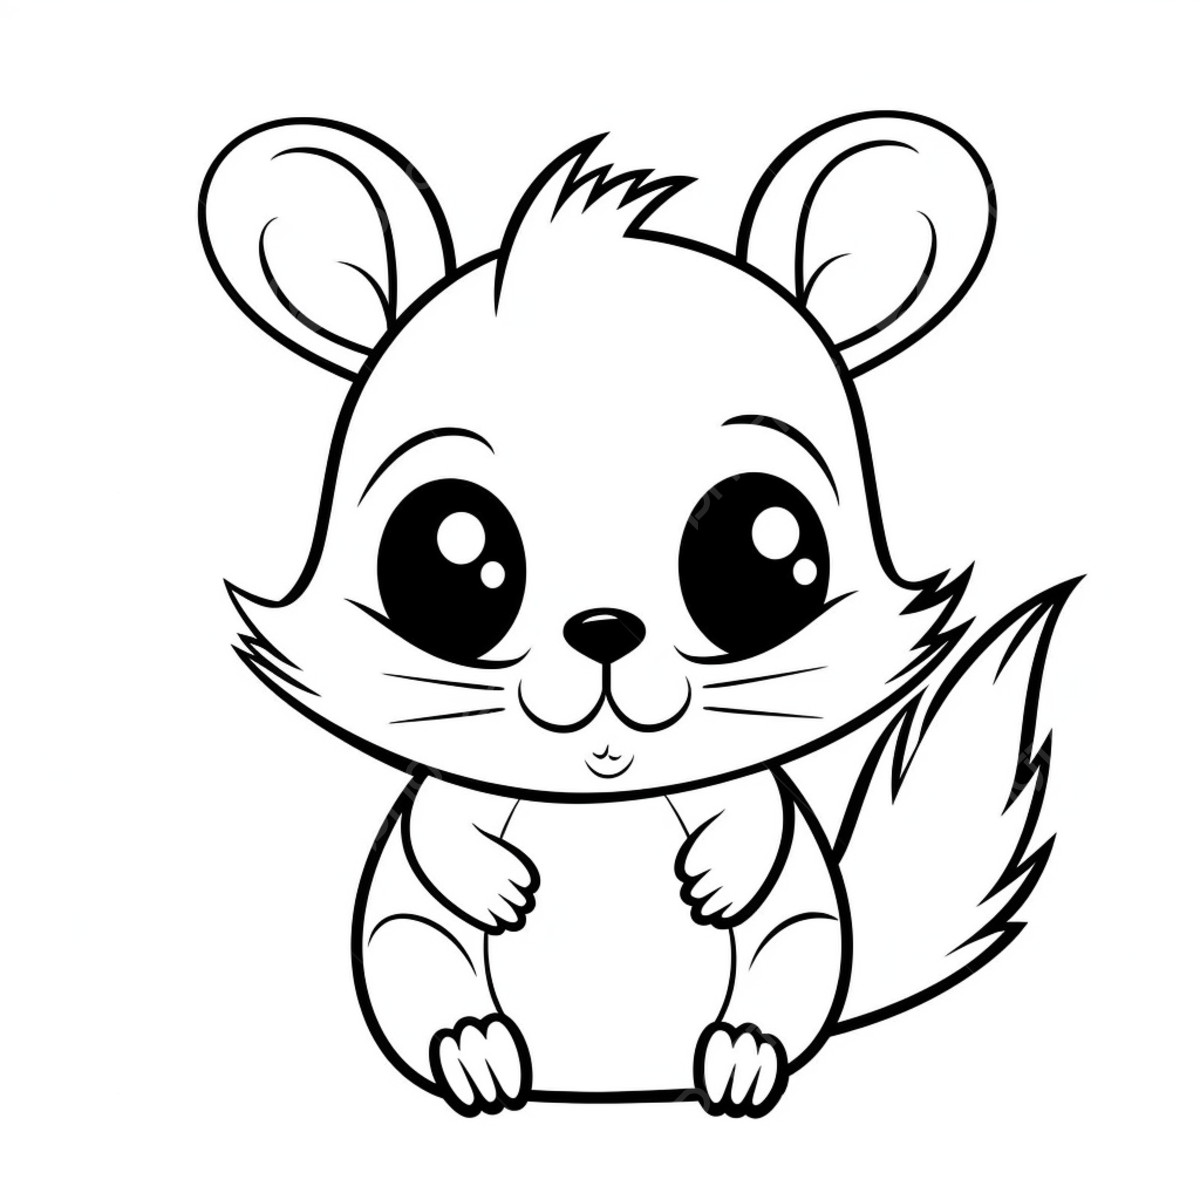 Cute rat coloring page with big eyes rat drawing eyes drawing ring drawing png transparent image and clipart for free download